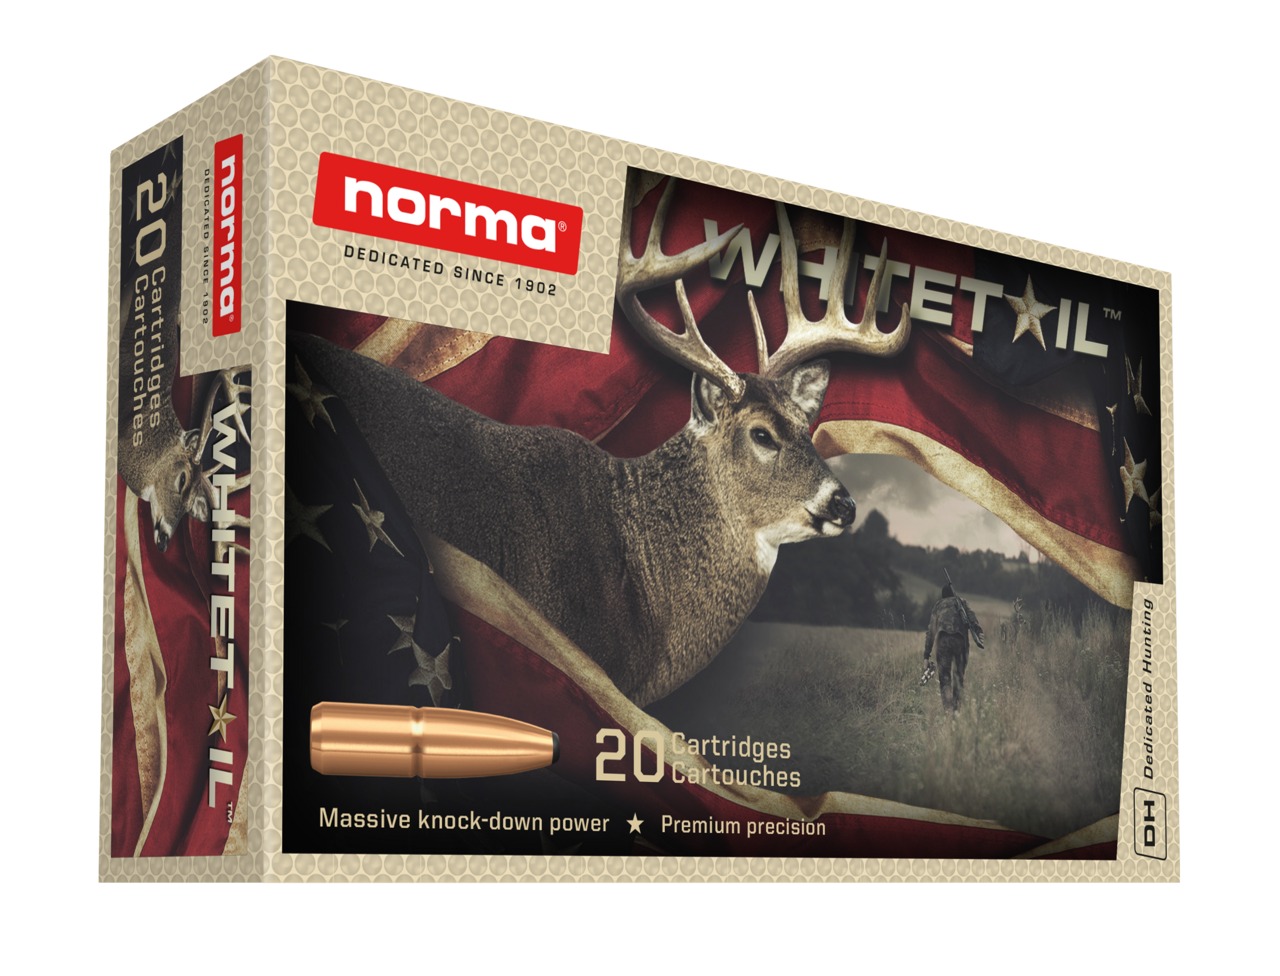 CART NORMA 300WIN MAG 150GR WHITETAIL BTE 20 ref 20177412 NORMA